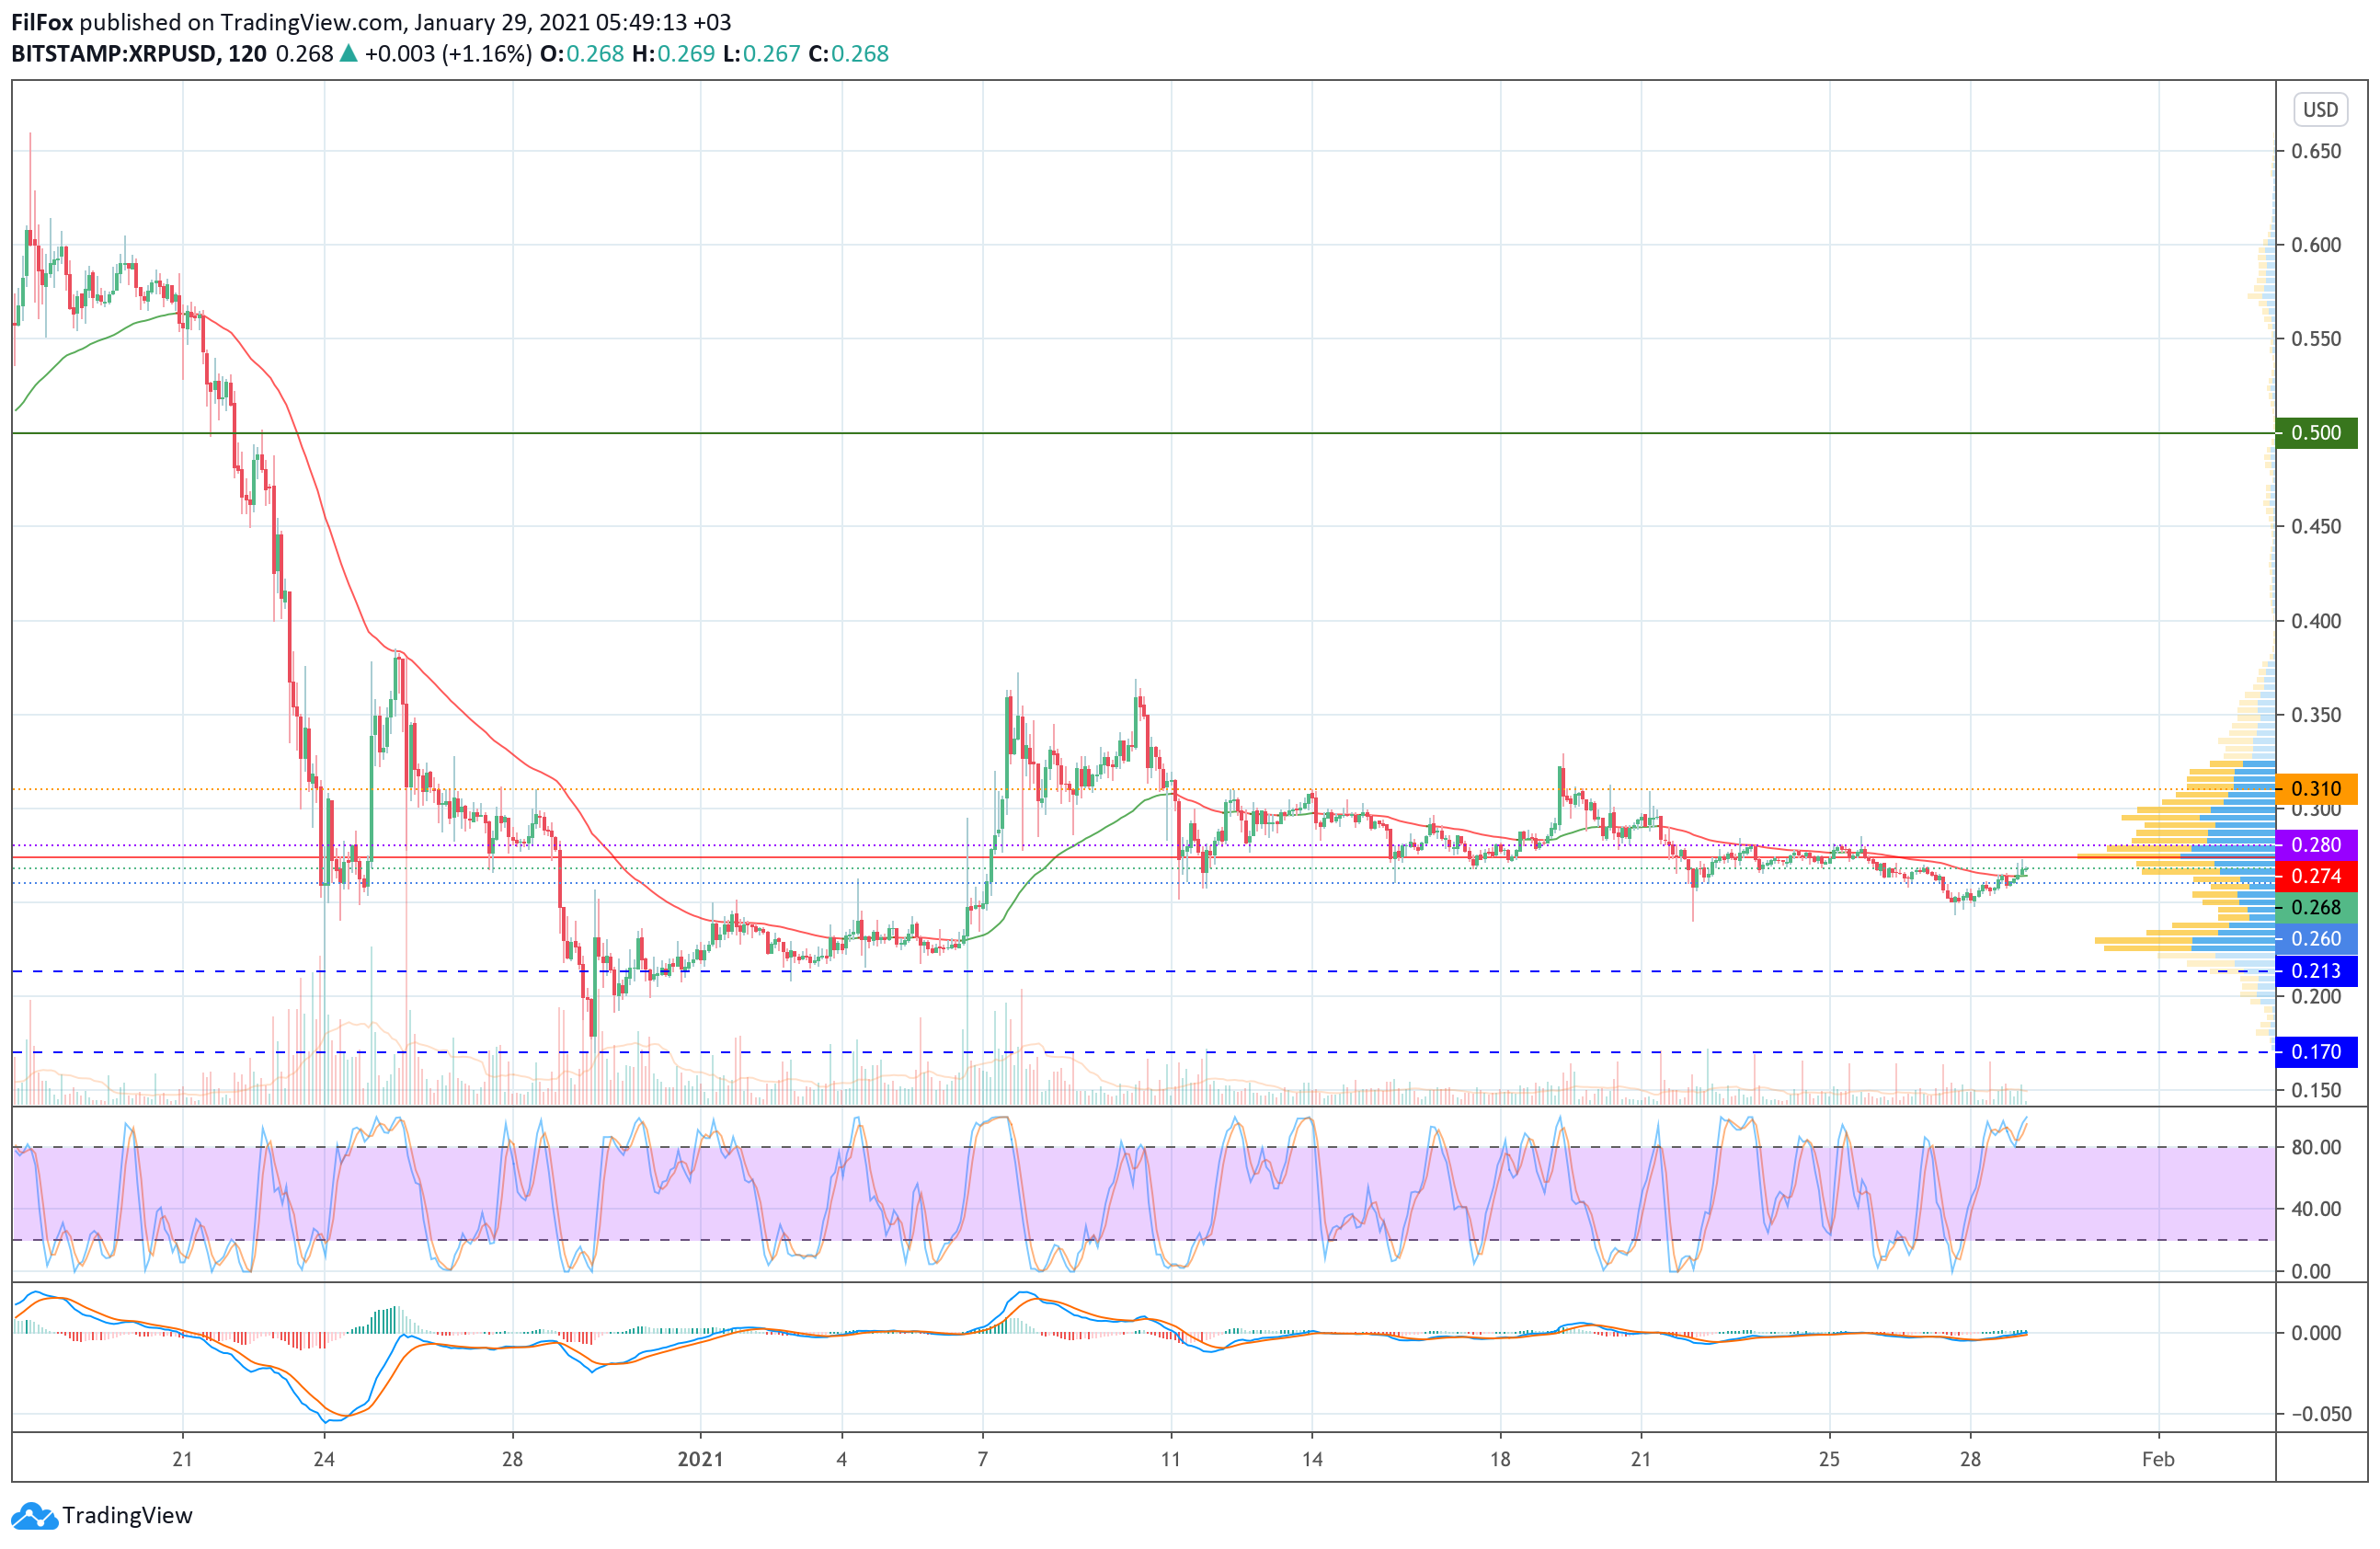 Analysis of prices for Bitcoin, Ethereum, Ripple for 01/29/2021